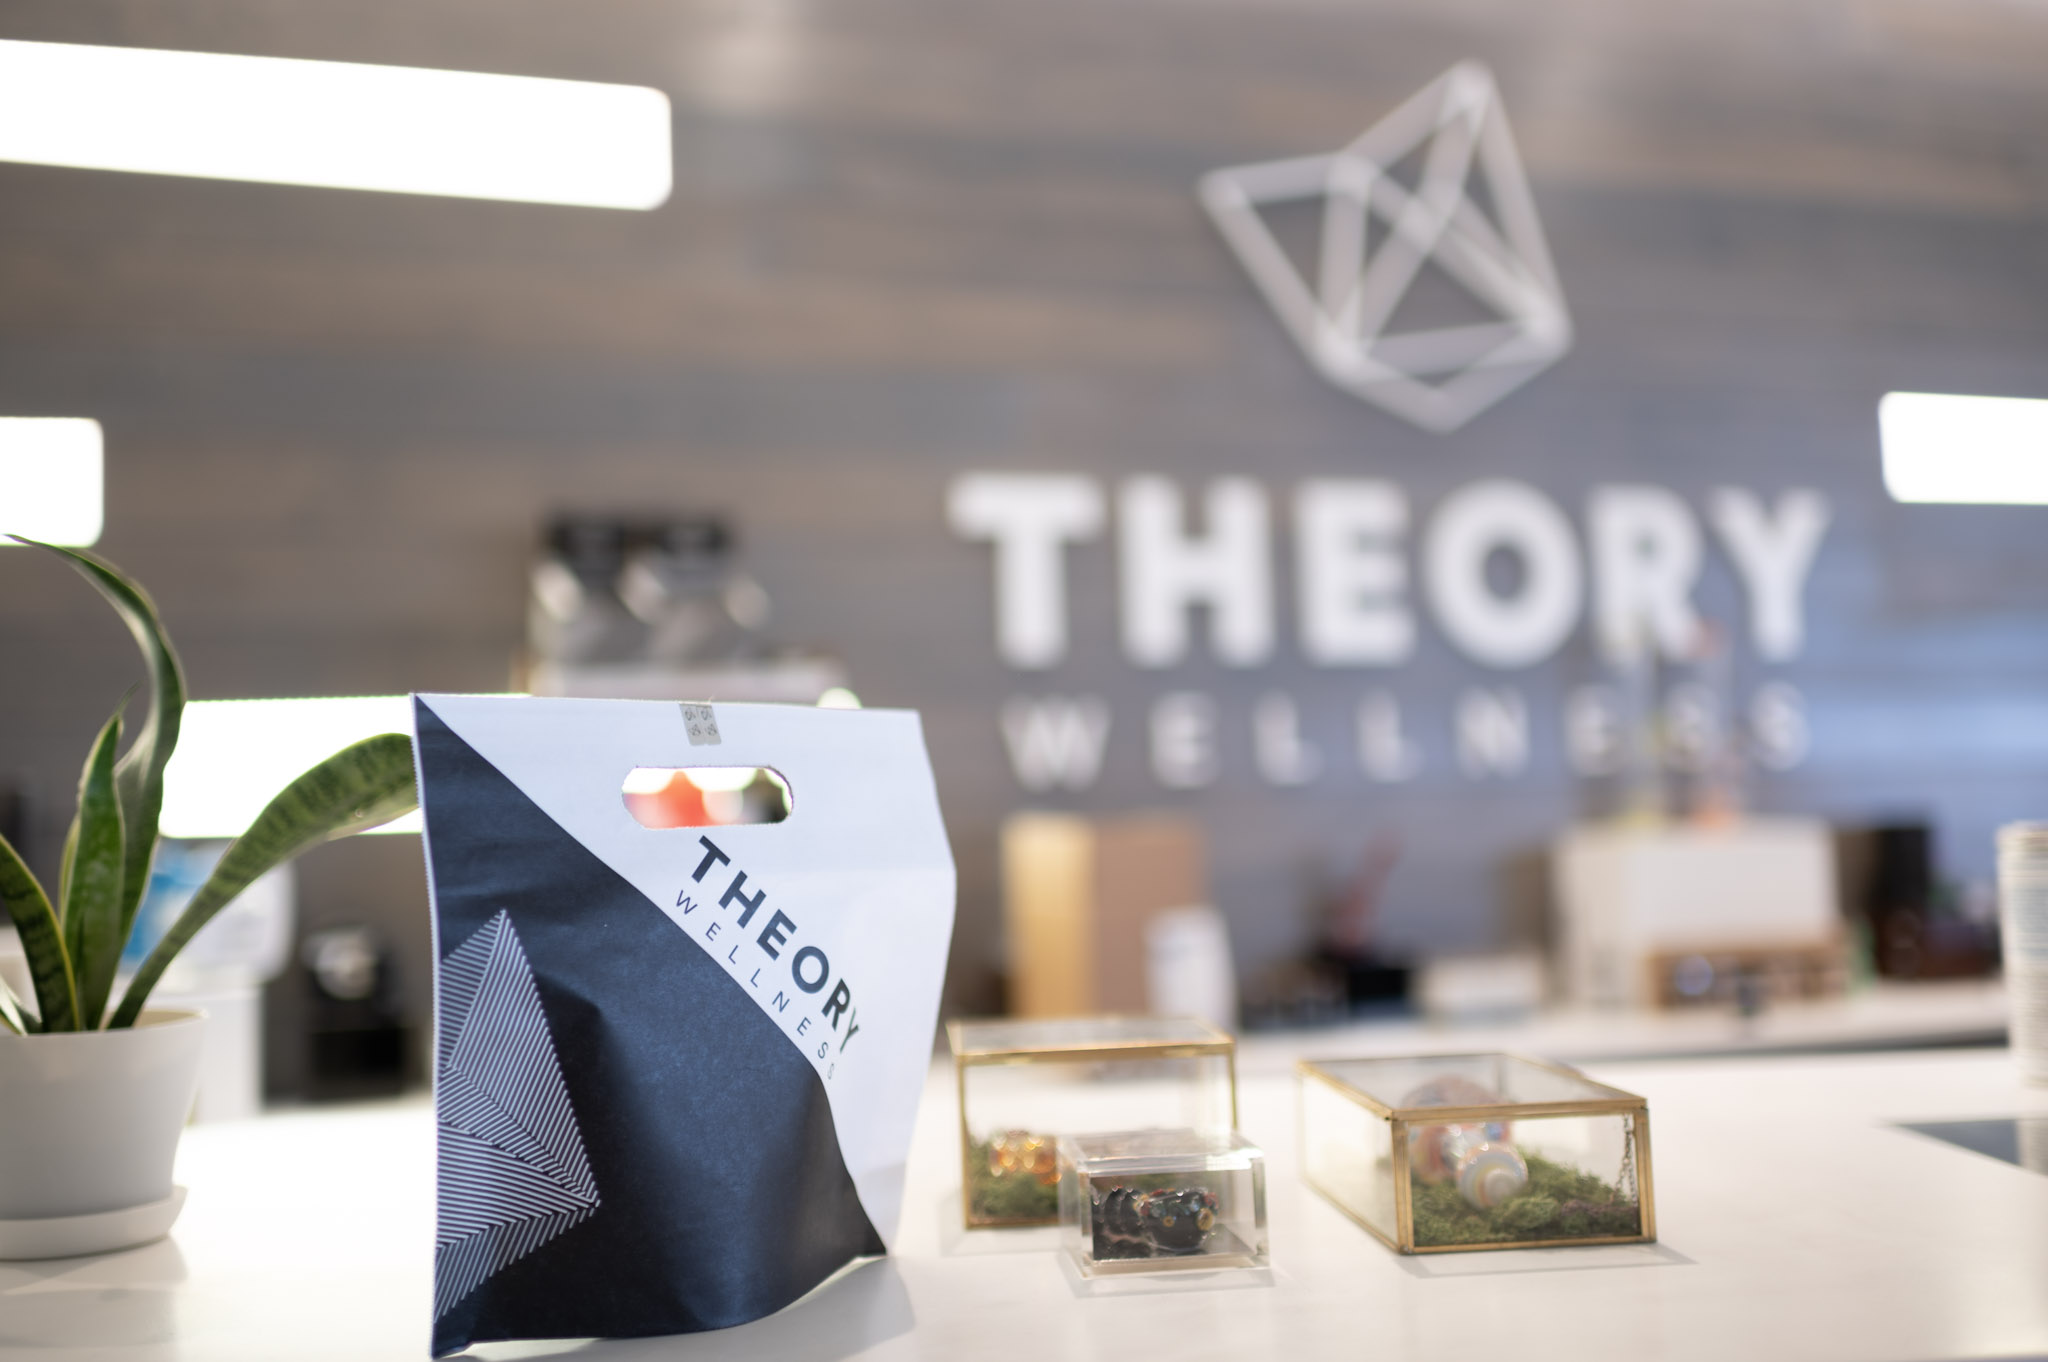 theory wellness counter with products